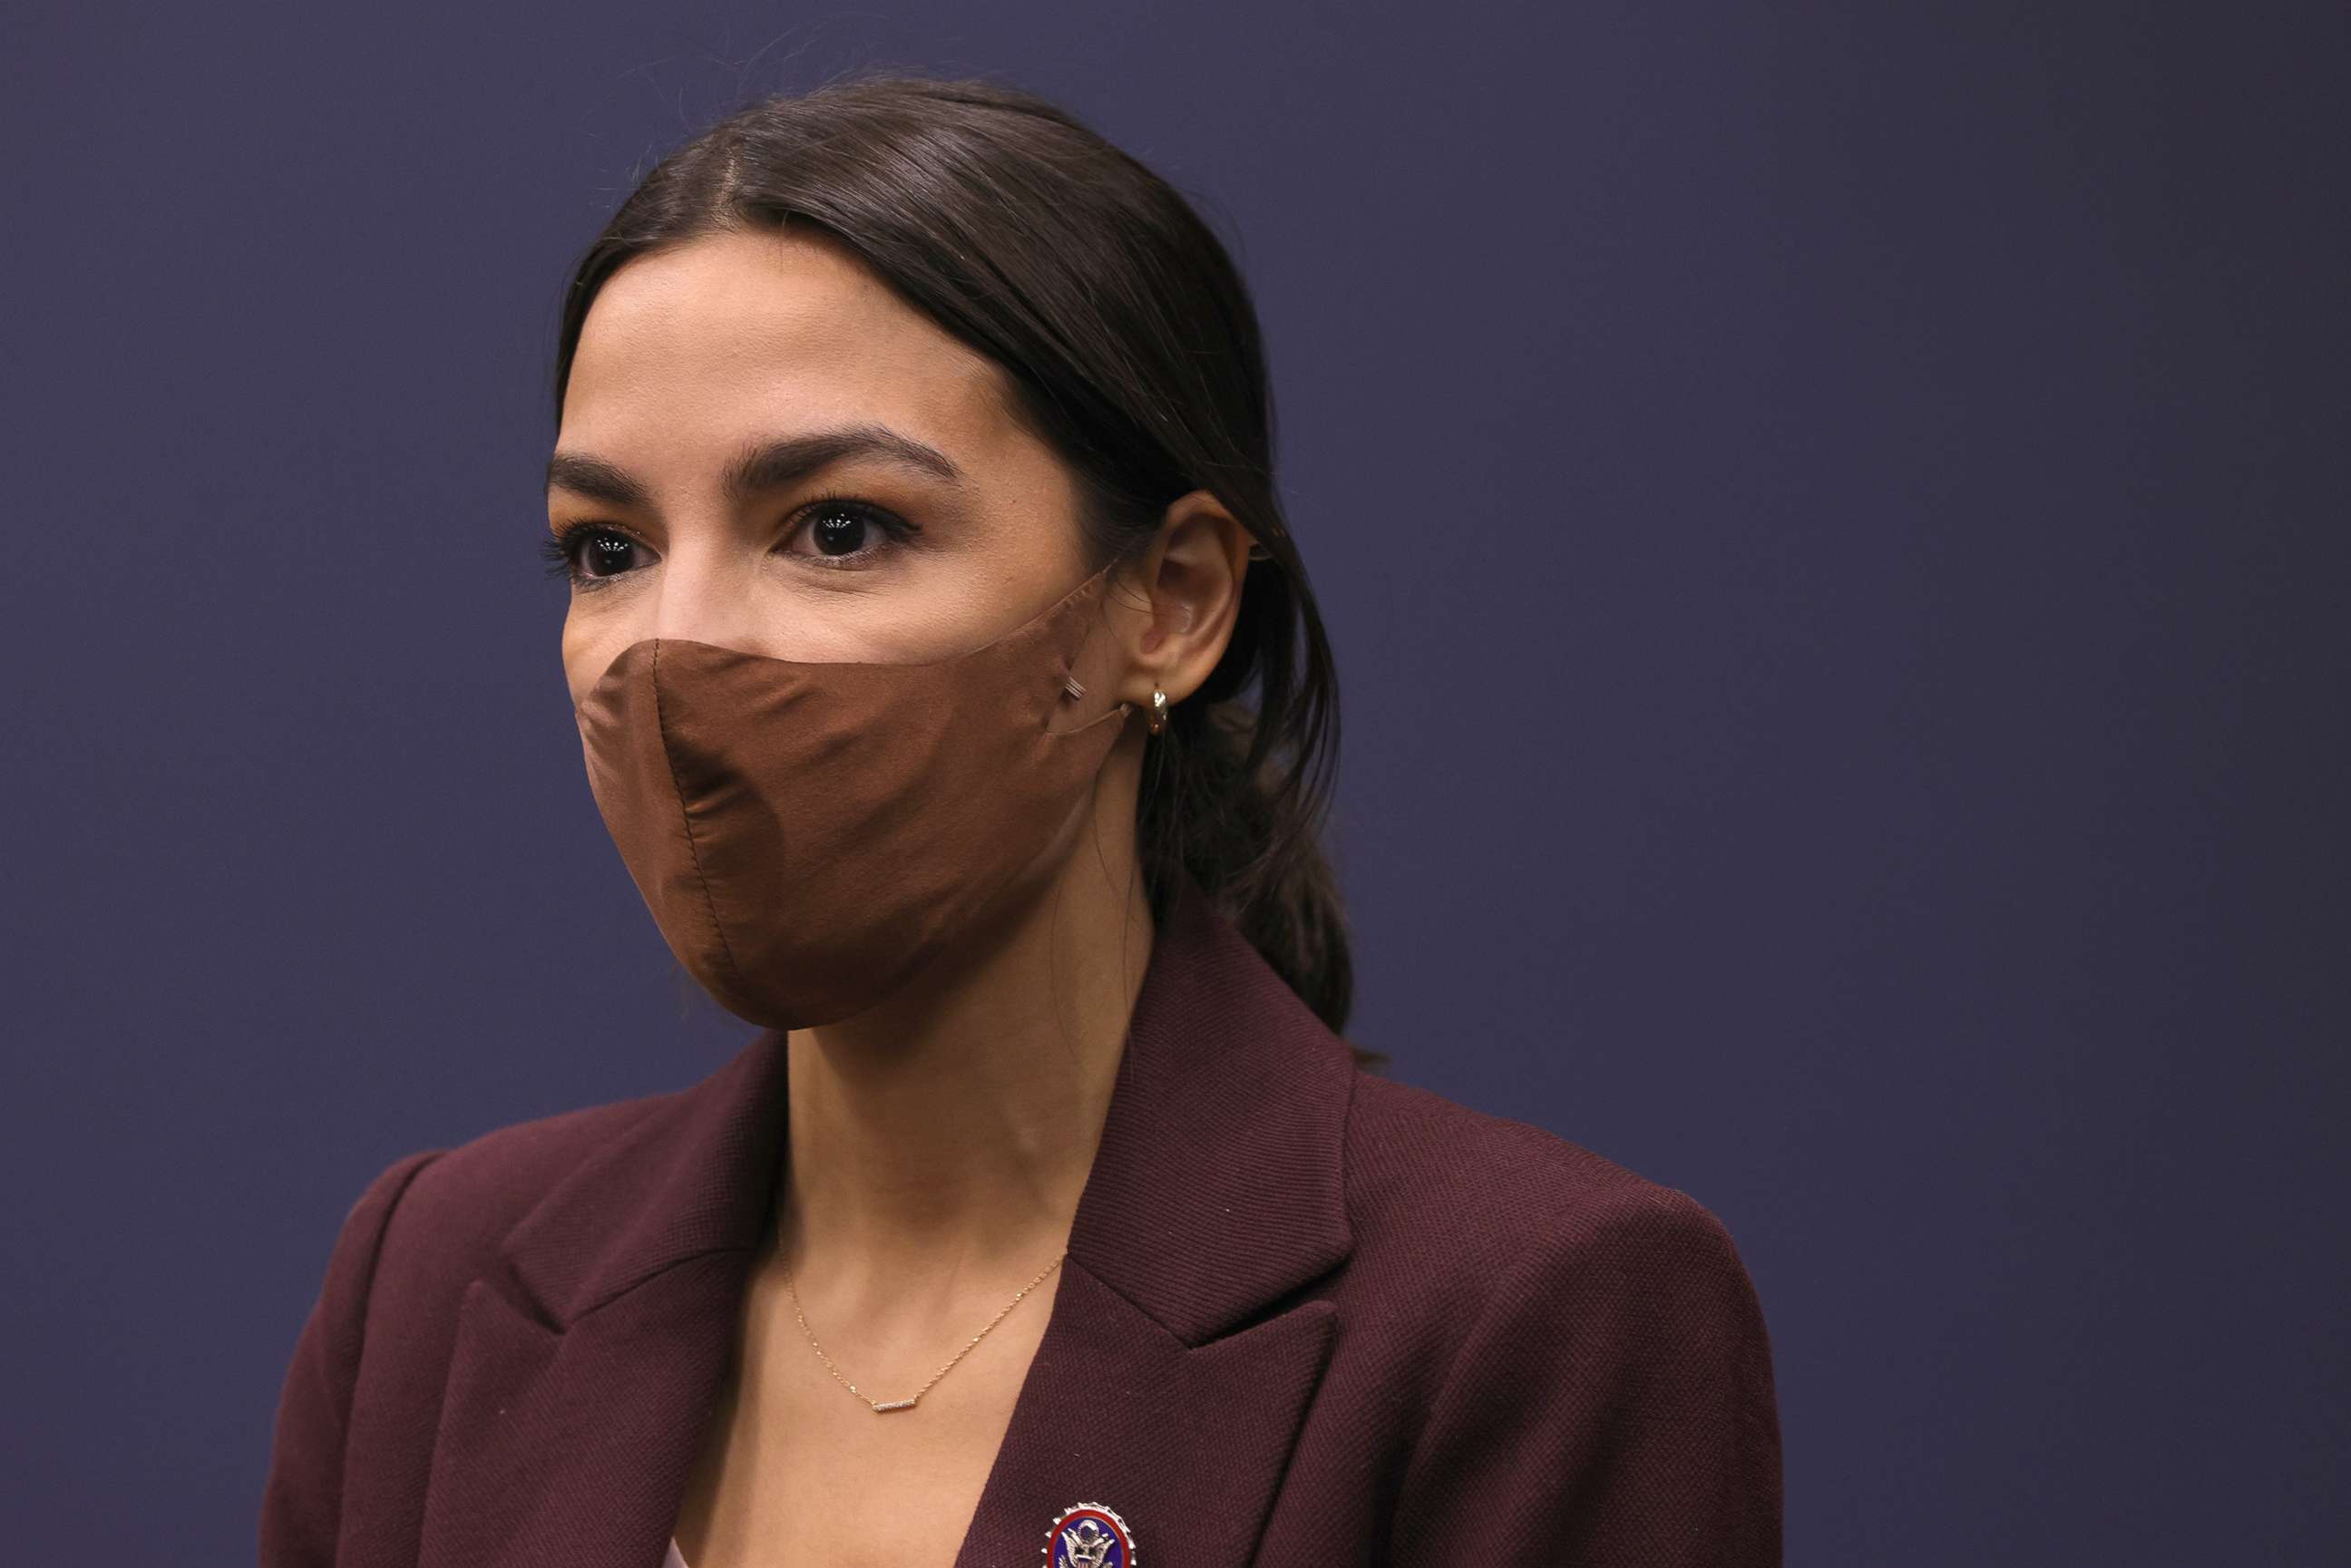 PHOTO: Rep. Alexandria Ocasio-Cortez listens during a news conference to introduce the "Puerto Rico Self-Determination Act of 2021" at Rayburn House Office Building on Capitol Hill, March 18, 2021.